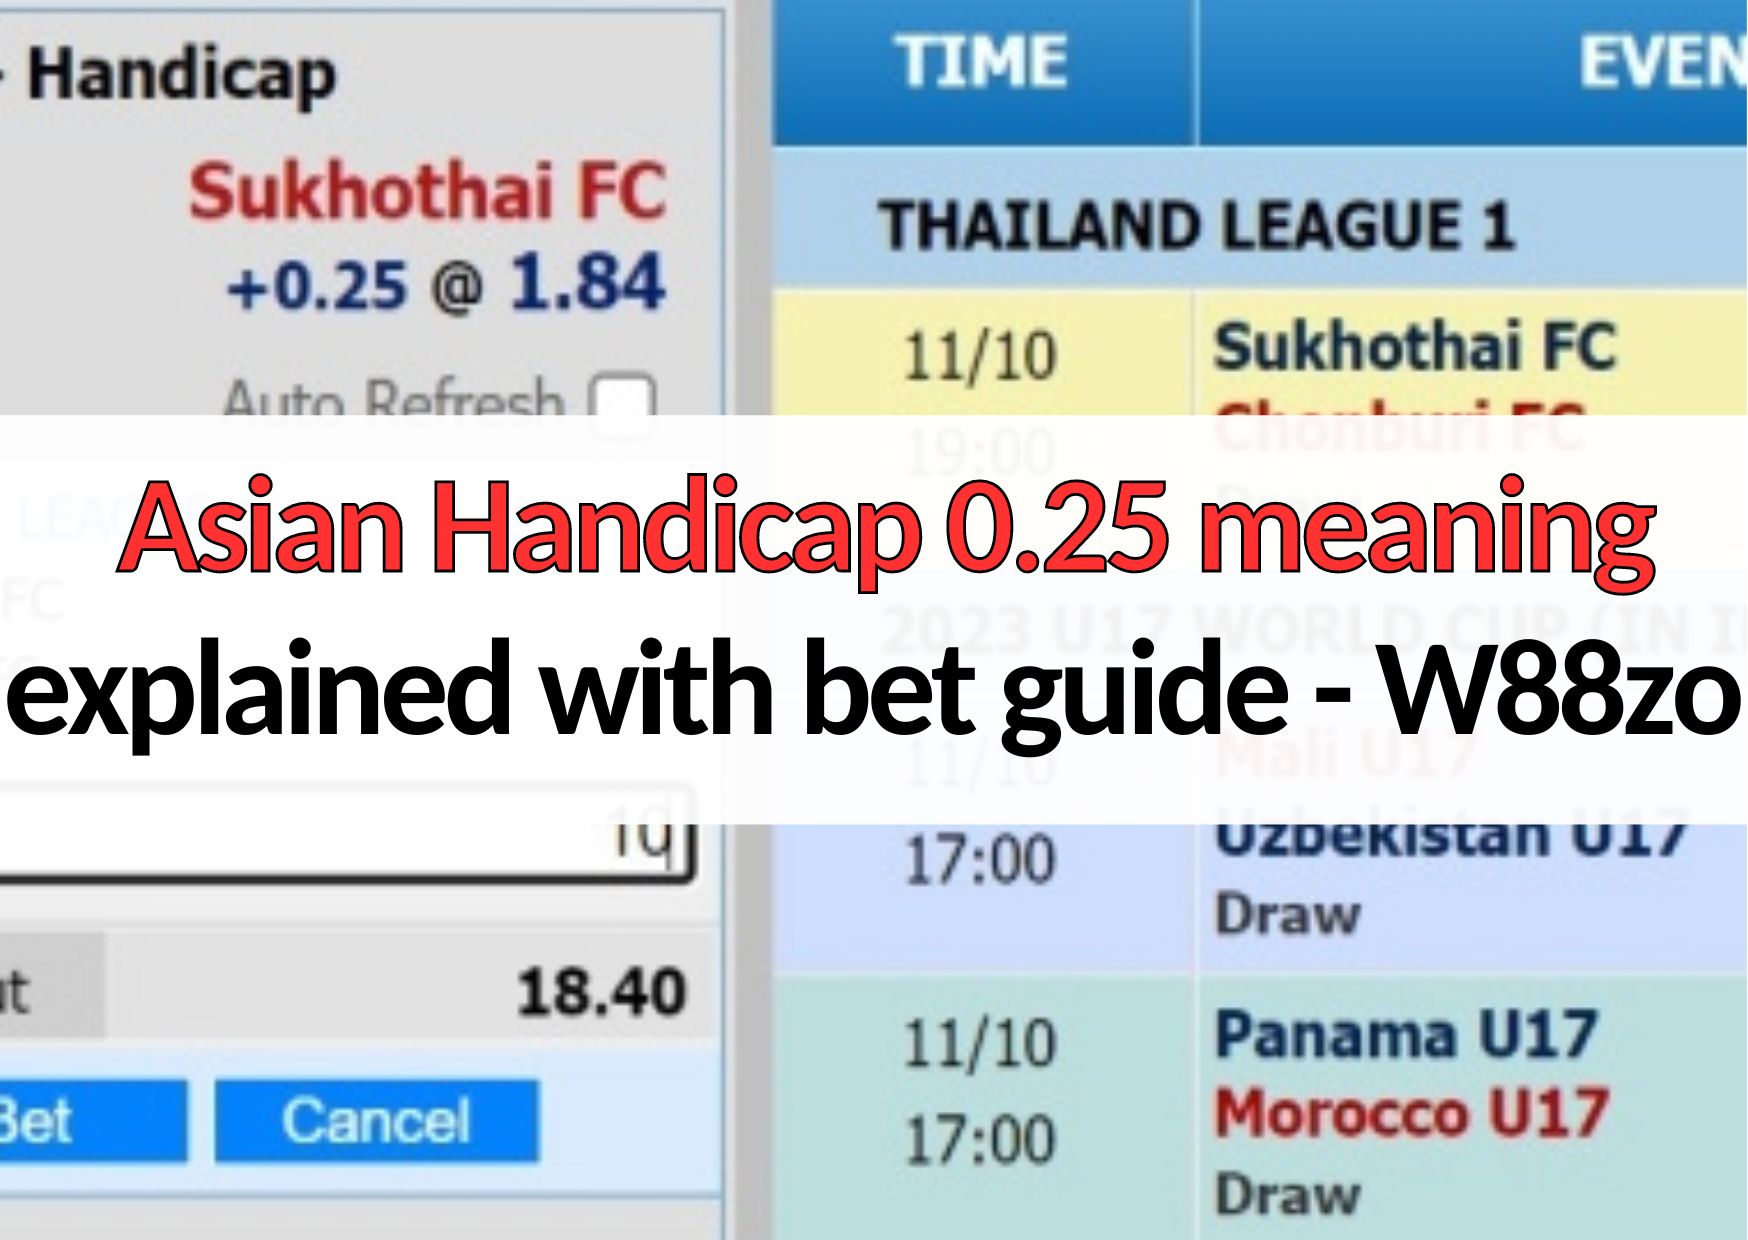 w88zo asian handicap 0.25 meaning explained